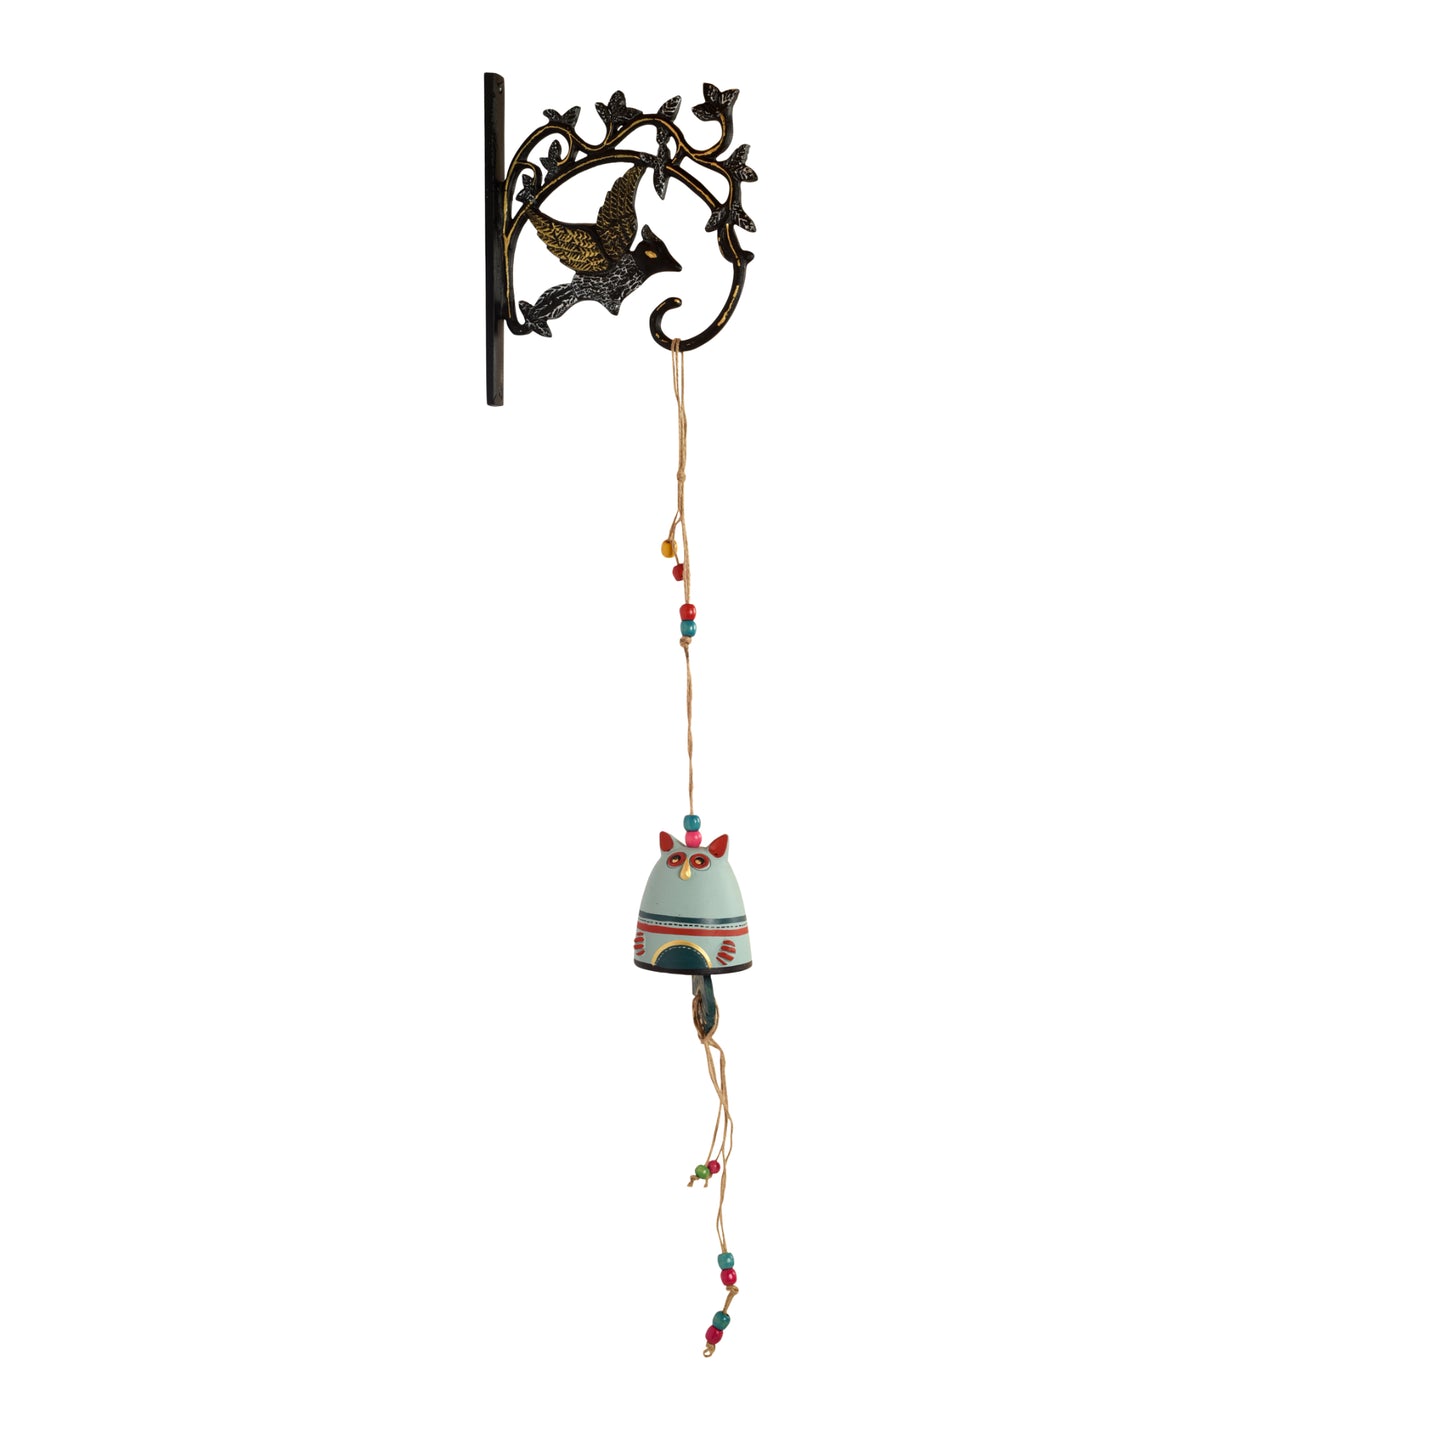 Handpainted Terracotta Wind Chime with Metal Wooden Wall Hanger